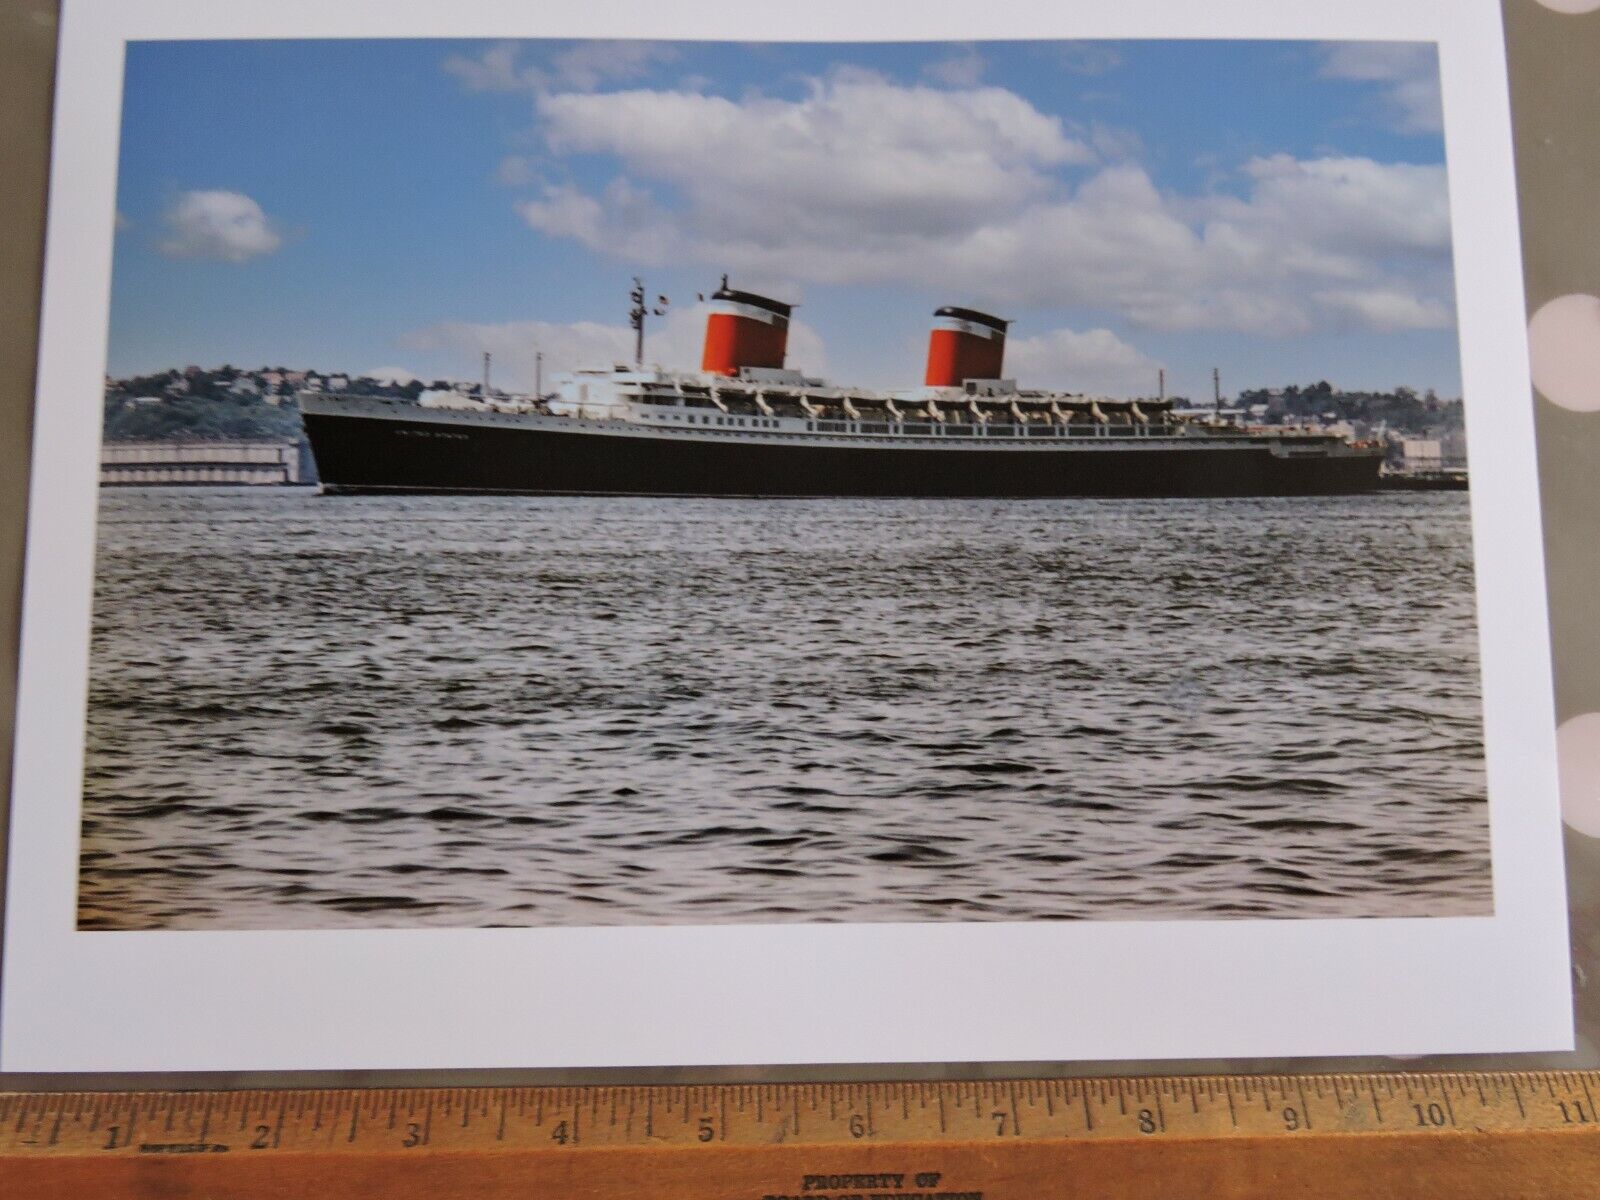 Ss United States Wallpapers